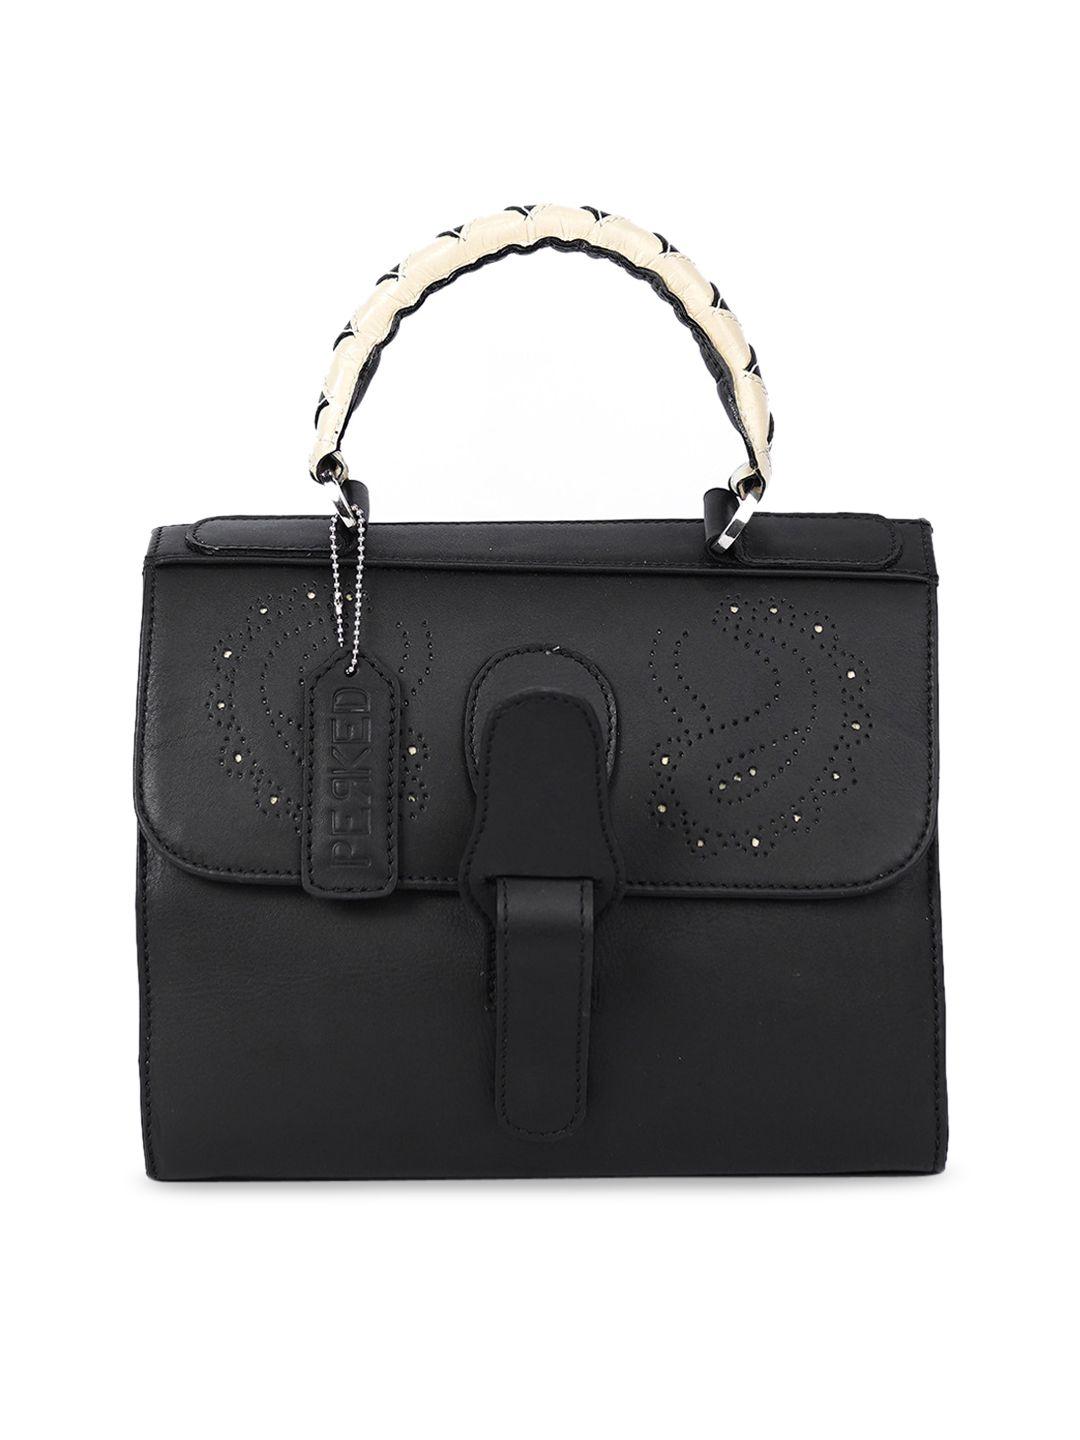 perked self design leather structured handheld bag